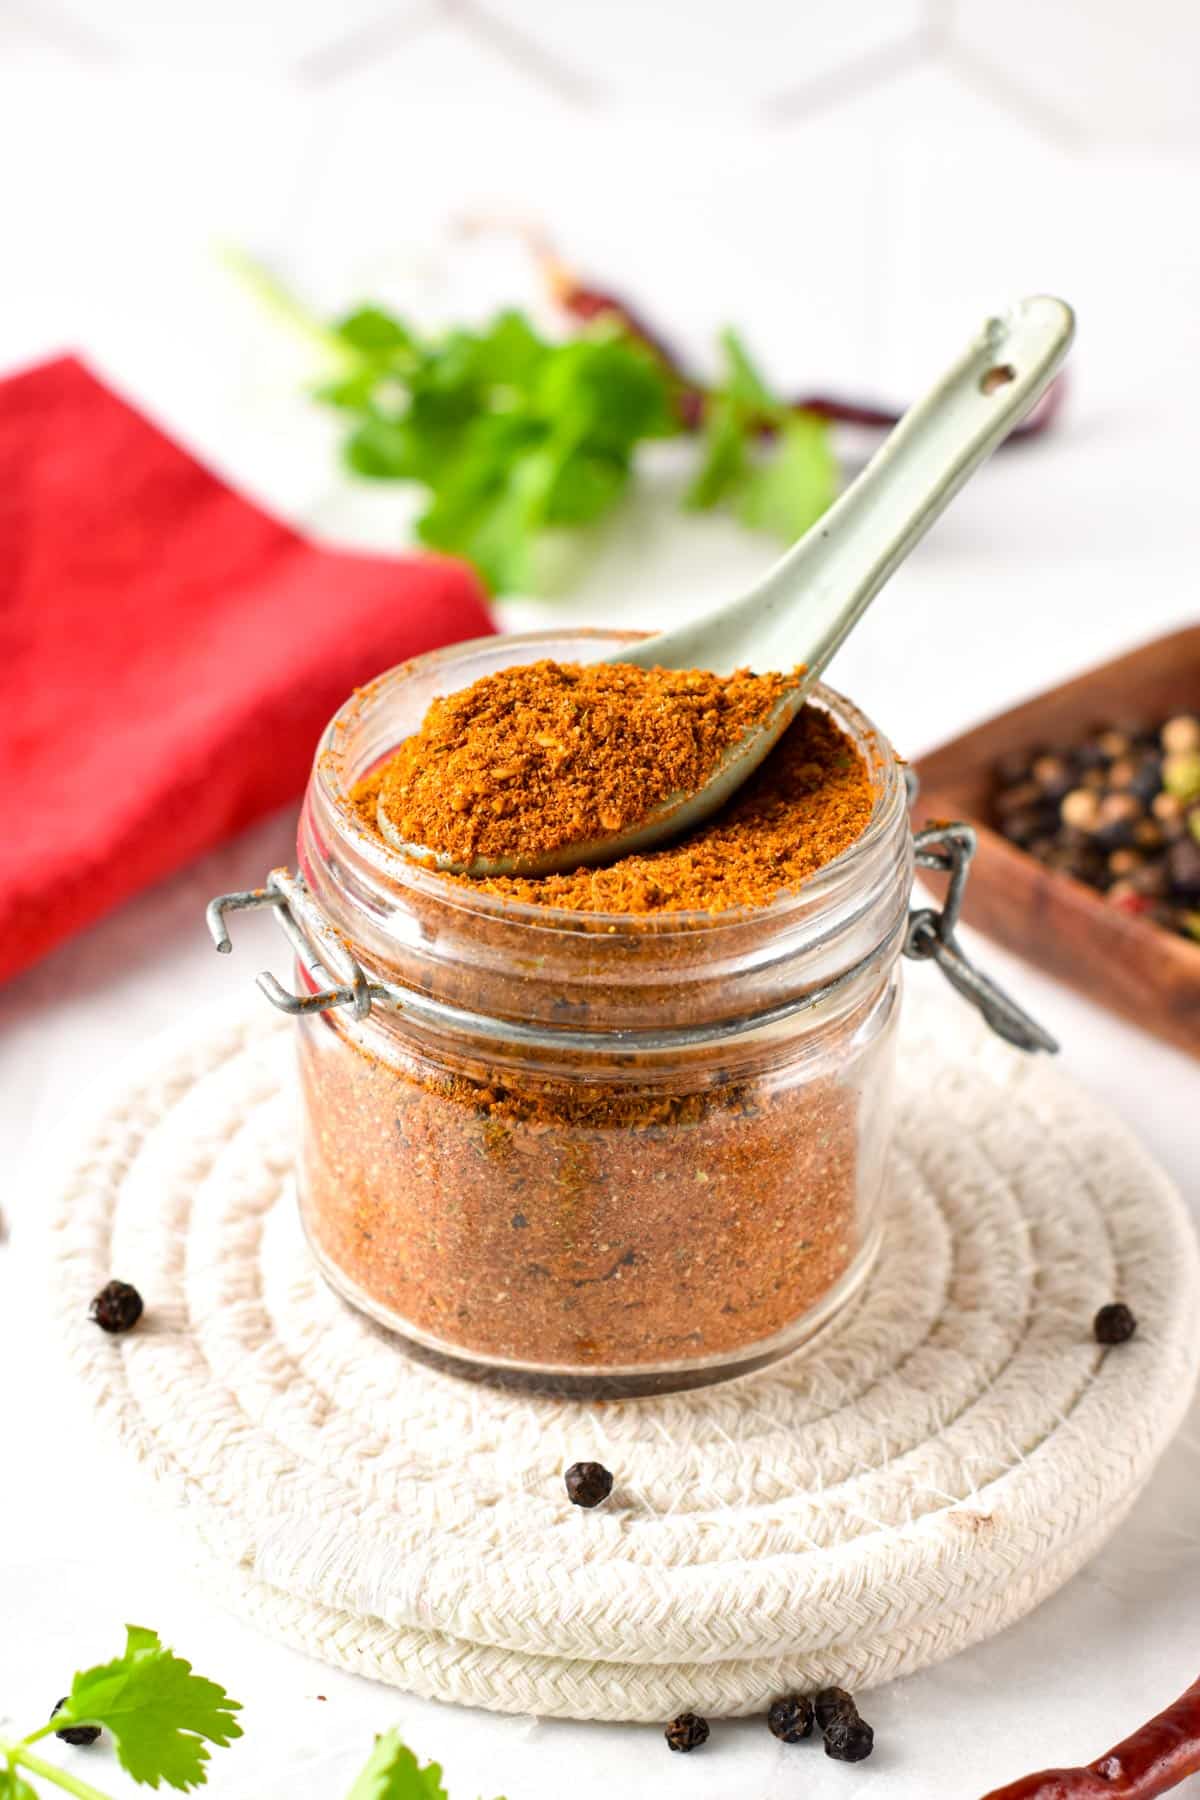 Learn how to make a Low Sodium Taco Seasoning season all kinds of food from chicken to beef or vegetables for your taco night.